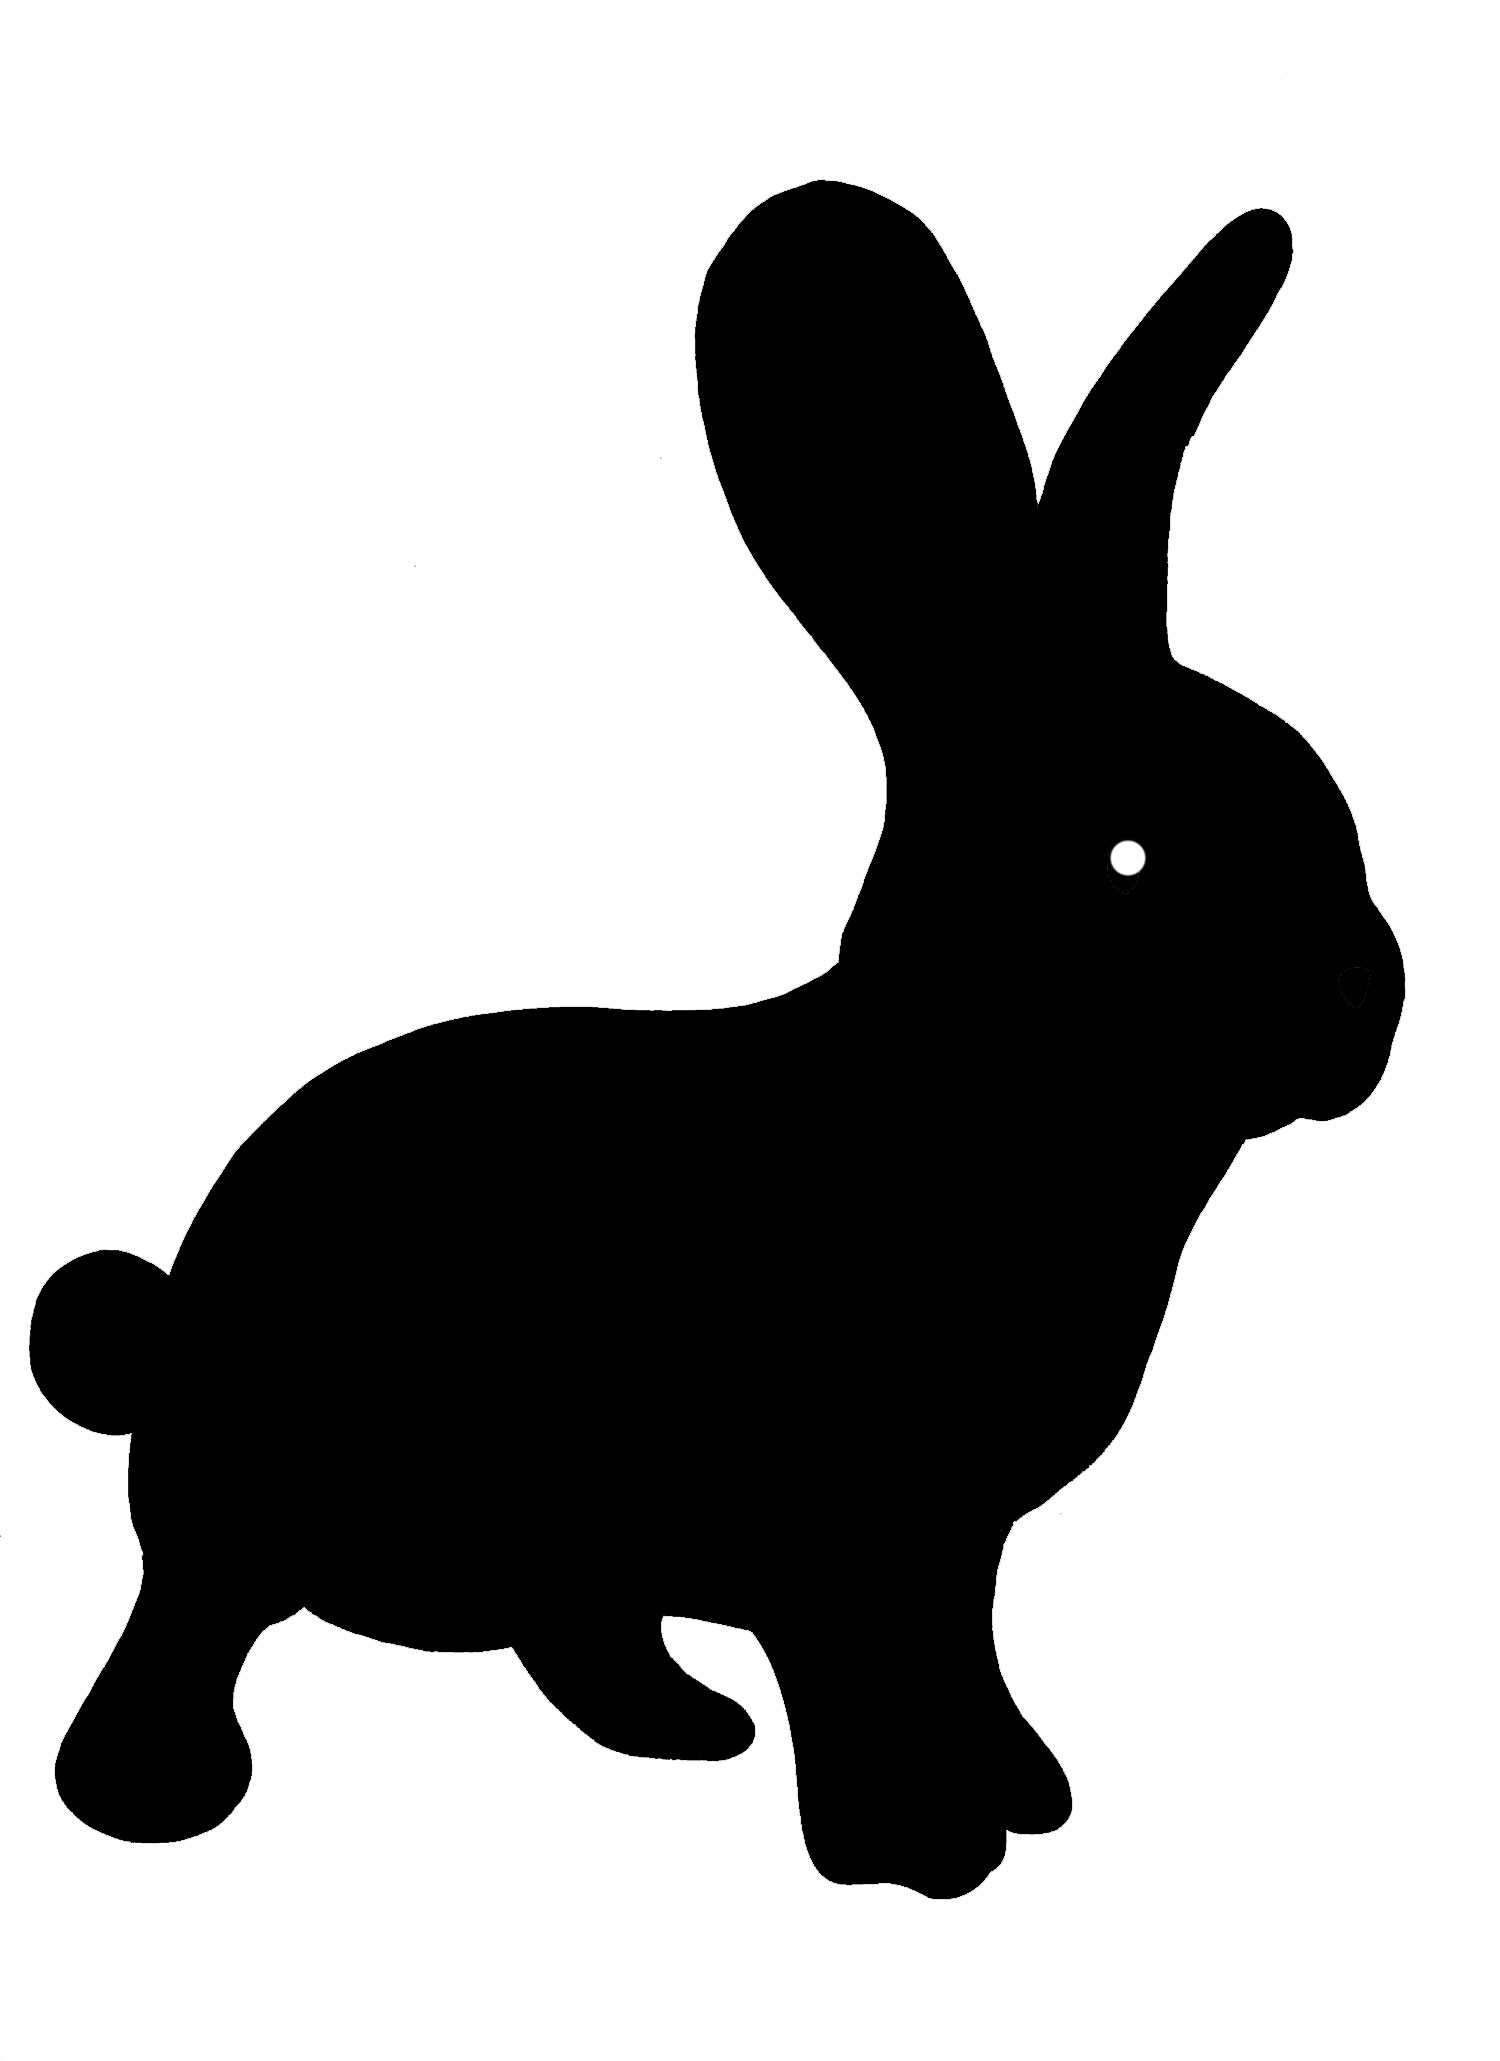 clipart image bunny silhouette - photo #14